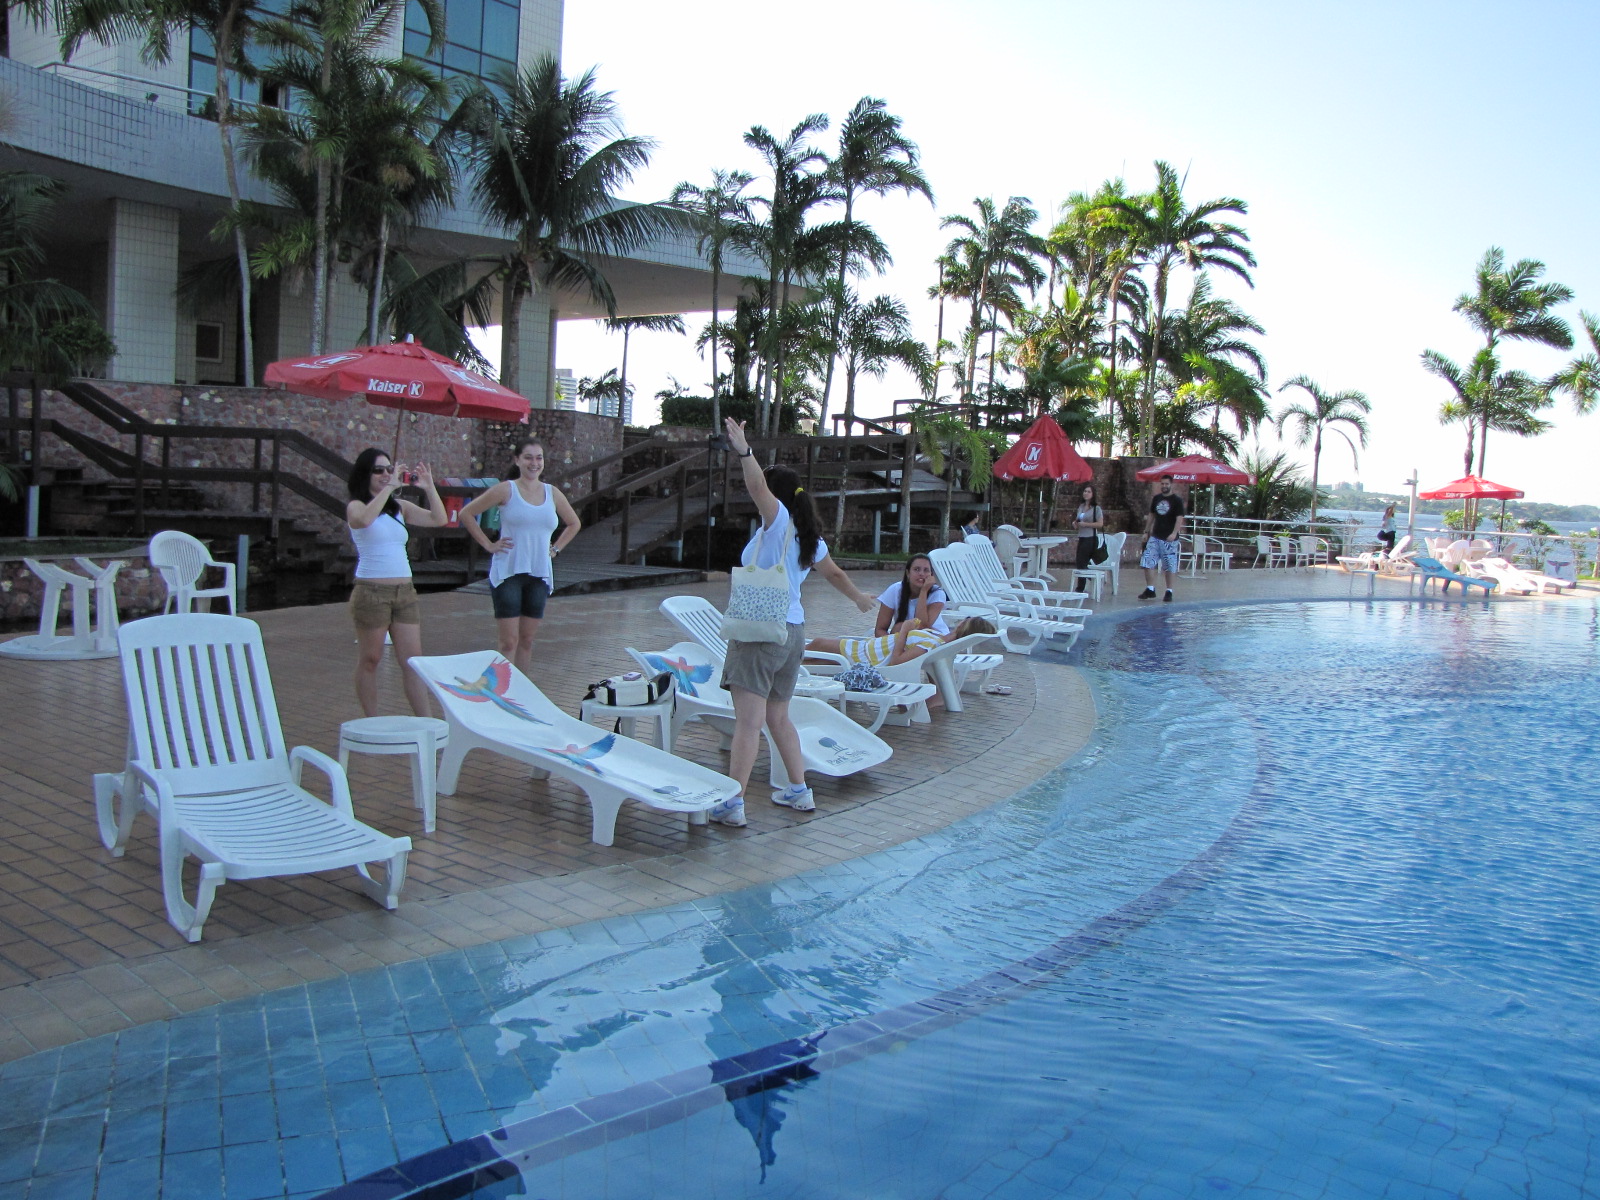 people are relaxing in lounge chairs beside a pool